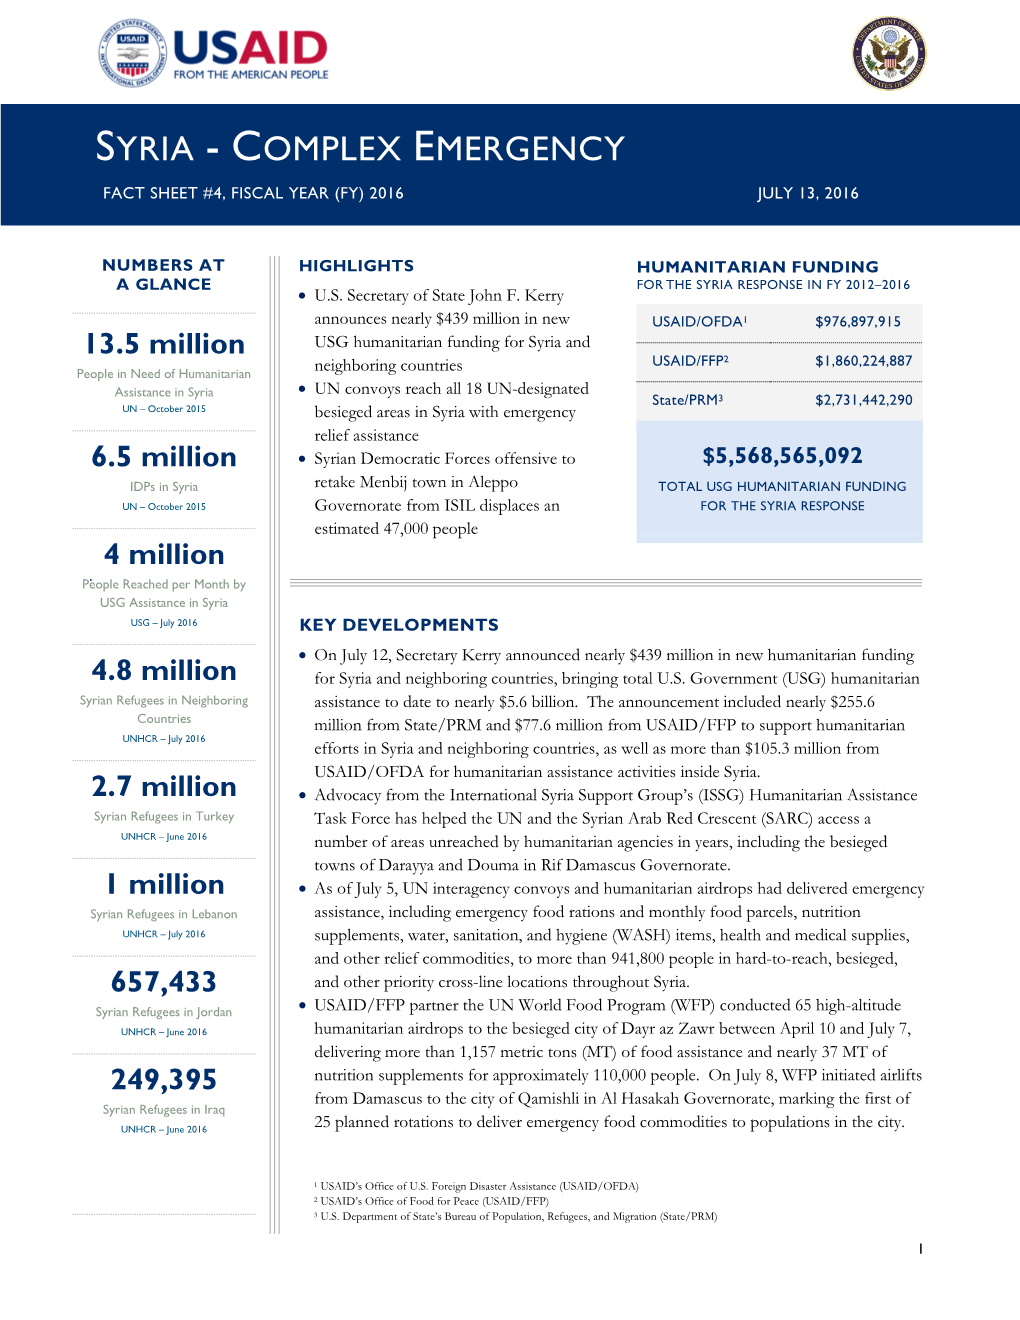 Syria Complex Emergency Fact Sheet #4